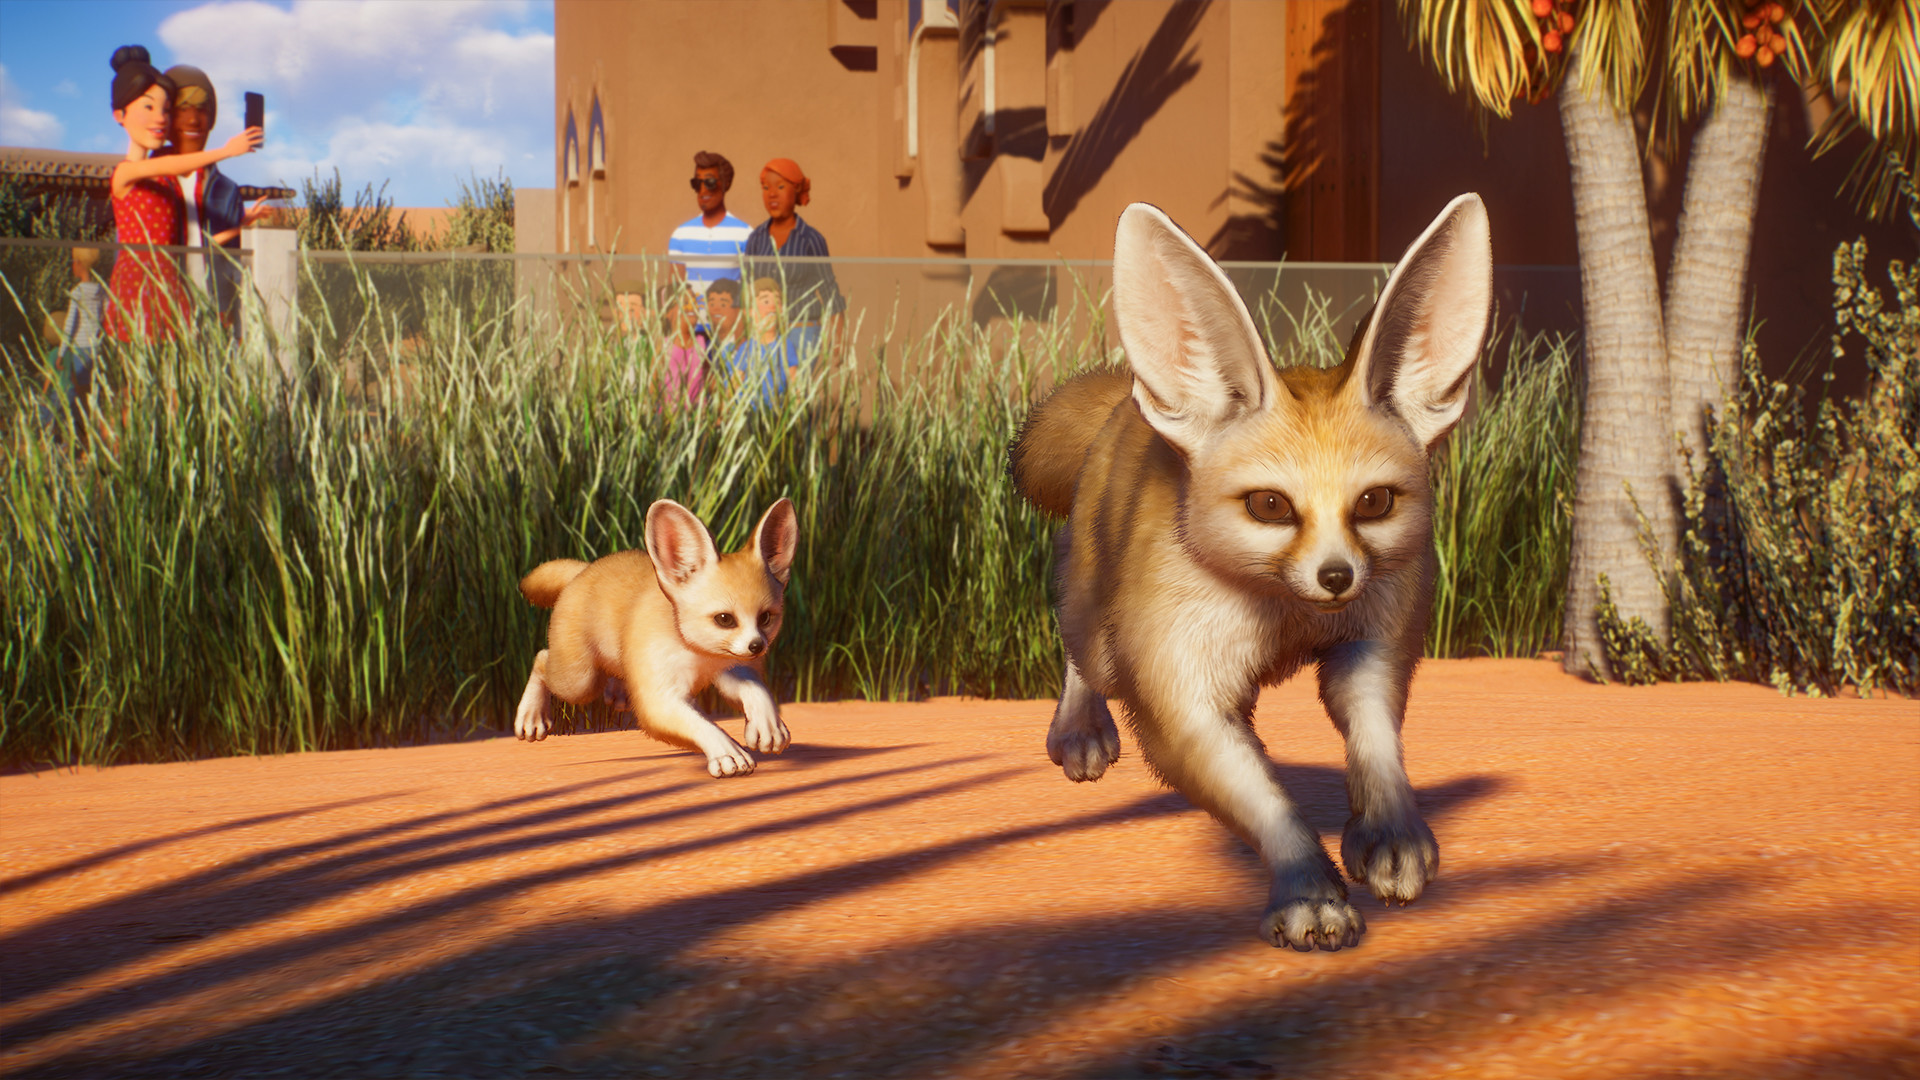 Planet Zoo: Africa Pack DLC, Update 1.6 Now Available